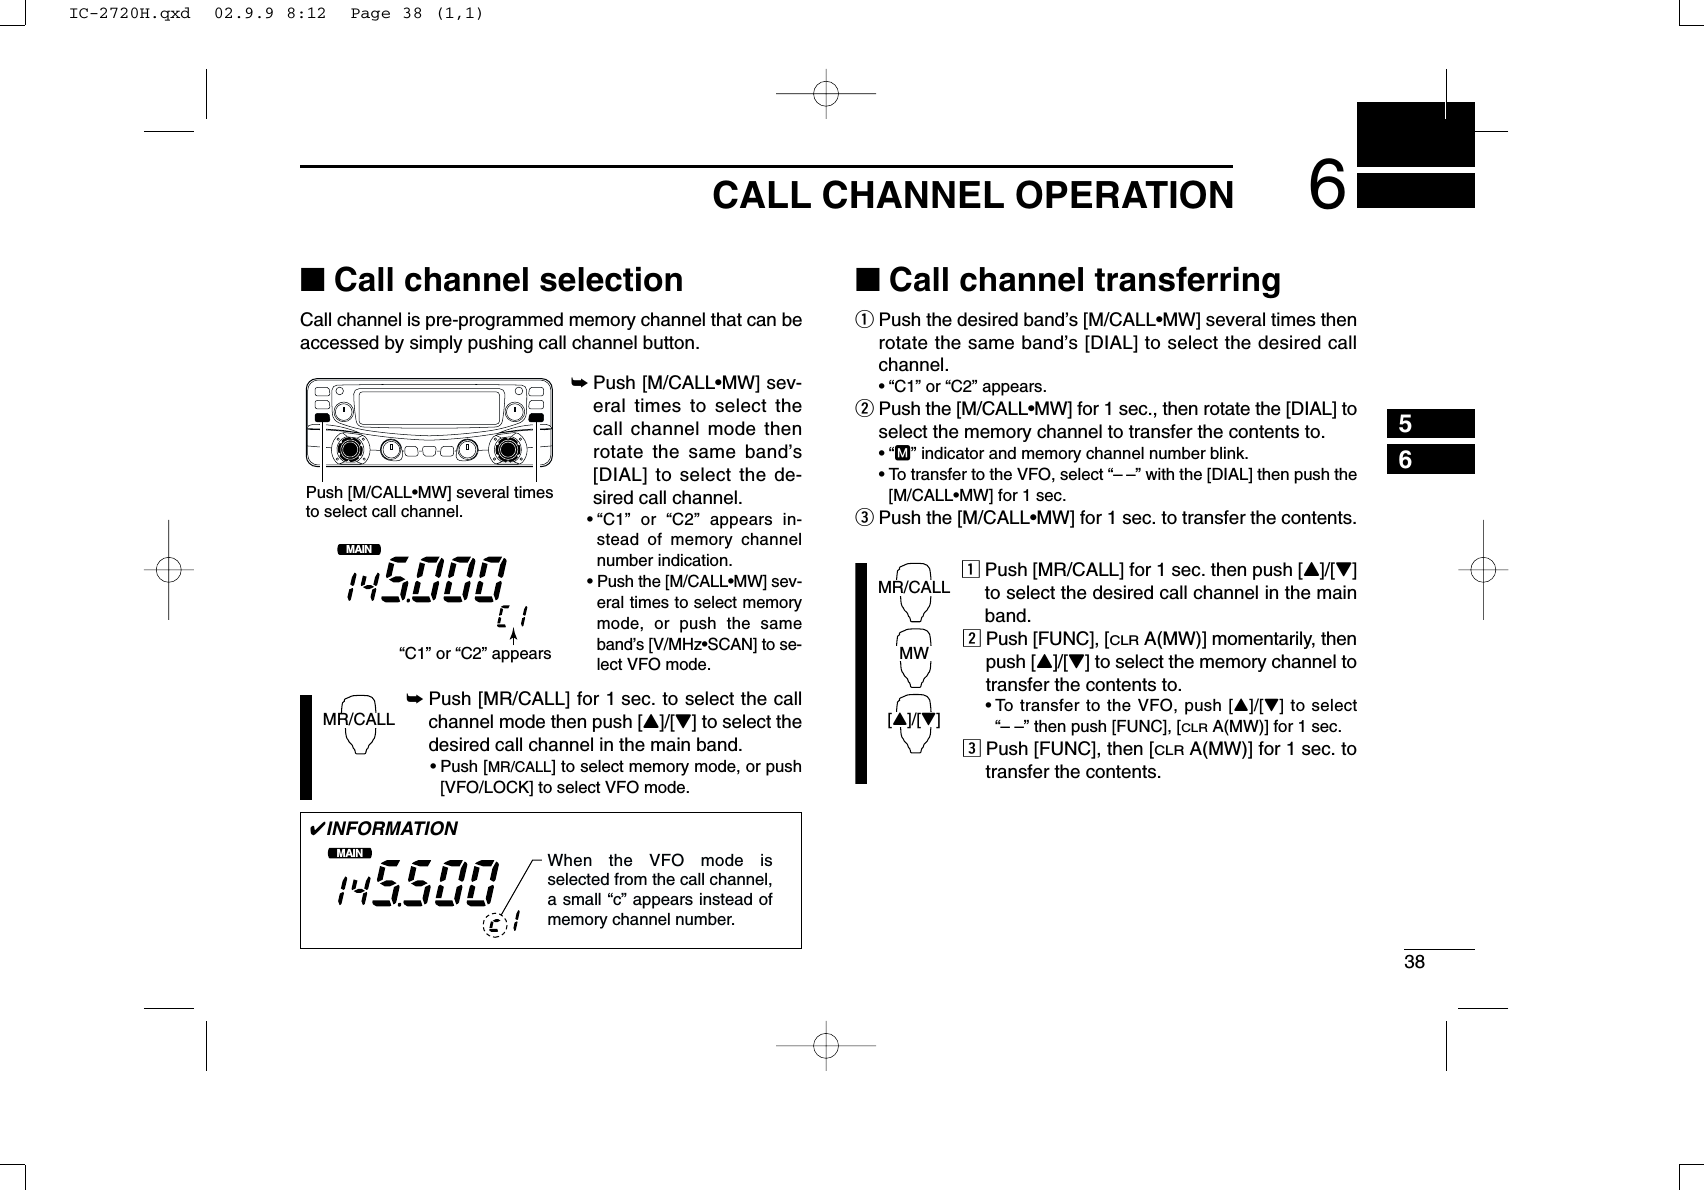 386CALL CHANNEL OPERATION56■Call channel selectionCall channel is pre-programmed memory channel that can beaccessed by simply pushing call channel button.➥Push [M/CALL•MW] sev-eral times to select thecall channel mode thenrotate the same band’s[DIAL] to select the de-sired call channel.•“C1” or “C2” appears in-stead of memory channelnumber indication.•Push the [M/CALL•MW] sev-eral times to select memorymode, or push the sameband’s [V/MHz•SCAN] to se-lect VFO mode.➥Push [MR/CALL] for 1 sec. to select the callchannel mode then push [Y]/[Z] to select thedesired call channel in the main band.•Push [MR/CALL] to select memory mode, or push[VFO/LOCK] to select VFO mode.■Call channel transferringqPush the desired band’s [M/CALL•MW] several times thenrotate the same band’s [DIAL] to select the desired callchannel.•“C1” or “C2” appears.wPush the [M/CALL•MW] for 1 sec., then rotate the [DIAL] toselect the memory channel to transfer the contents to.•“M” indicator and memory channel number blink.•To transfer to the VFO, select “– –” with the [DIAL] then push the[M/CALL•MW] for 1 sec. ePush the [M/CALL•MW] for 1 sec. to transfer the contents.zPush [MR/CALL] for 1 sec. then push [Y]/[Z]to select the desired call channel in the mainband.xPush [FUNC], [CLRA(MW)] momentarily, thenpush [Y]/[Z] to select the memory channel totransfer the contents to.•To transfer to the VFO, push [Y]/[Z] to select“– –” then push [FUNC], [CLRA(MW)] for 1 sec. cPush [FUNC], then [CLRA(MW)] for 1 sec. totransfer the contents.MR/CALLMW[Y]/[Z]MR/CALLMAINT  XMPush [M/CALL•MW] several timesto select call channel.“C1” or “C2” appears✔INFORMATIONMAINT  XMWhen the VFO mode is selected from the call channel, a small “c” appears instead of memory channel number. IC-2720H.qxd  02.9.9 8:12  Page 38 (1,1)